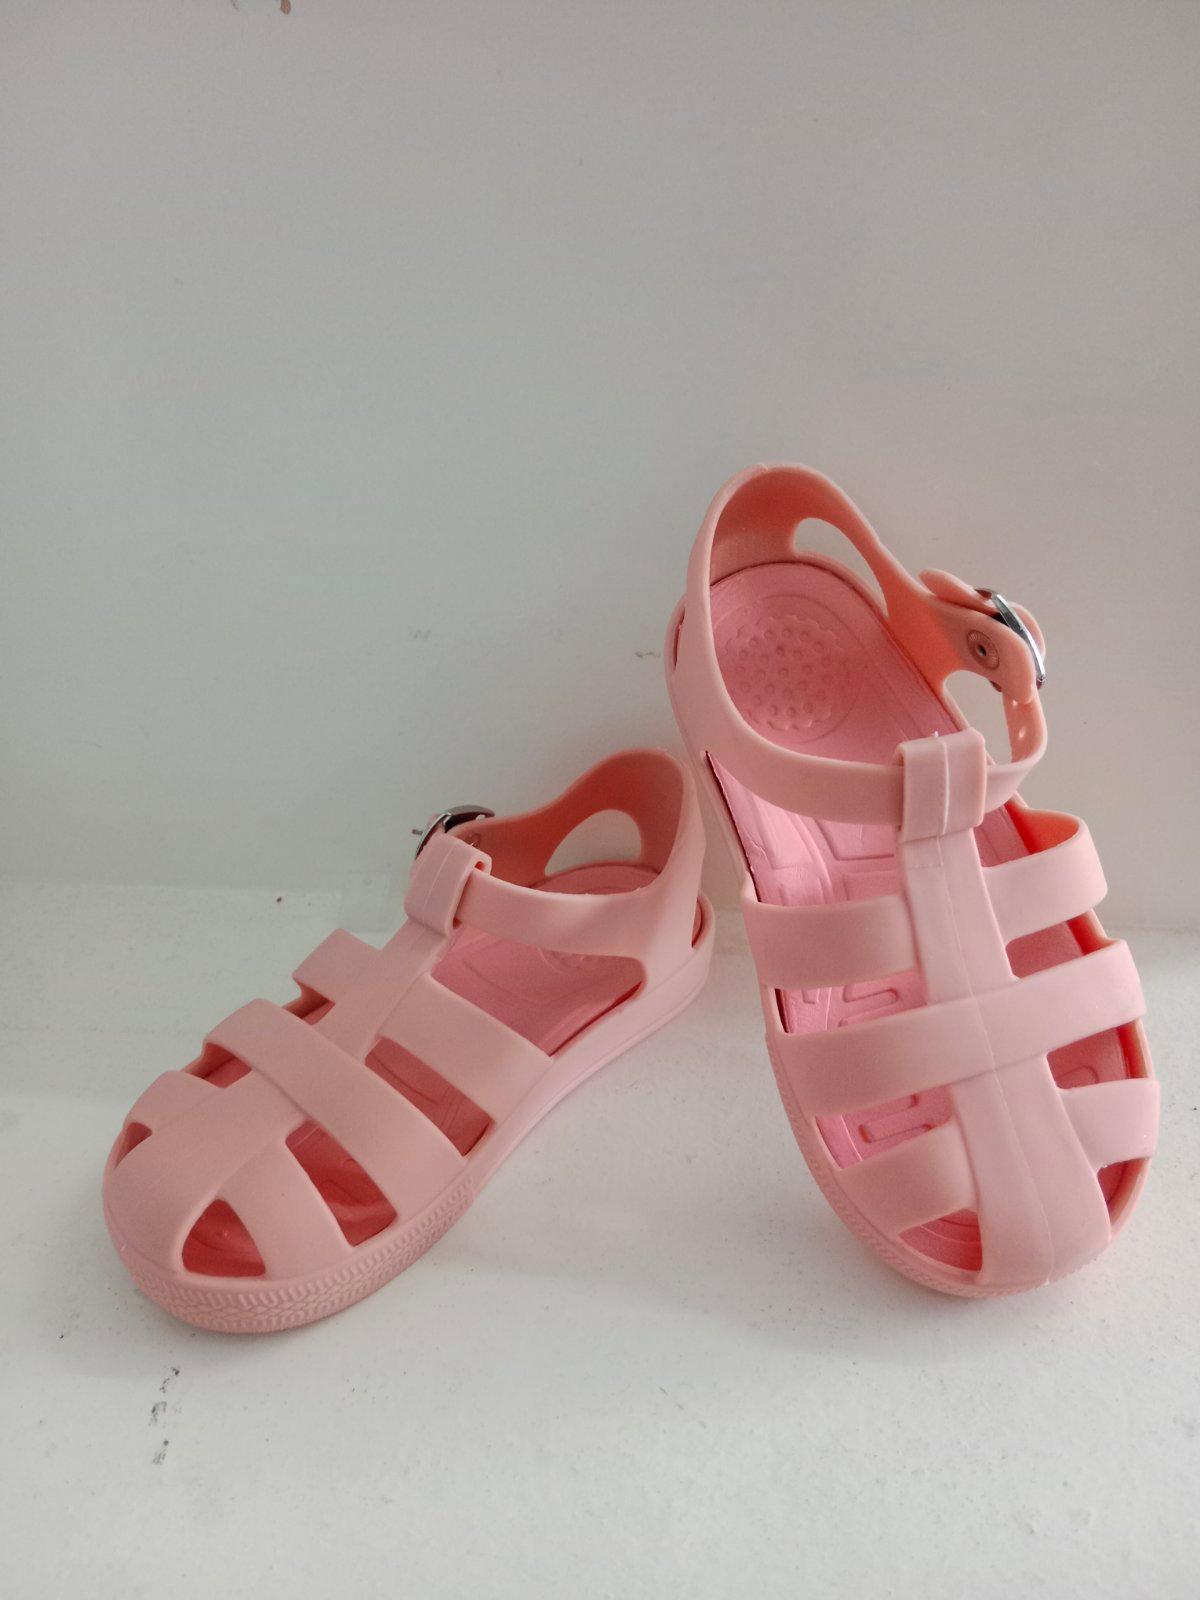 Roman Jelly Sandals Pink | The Nest Attachment Parenting Hub